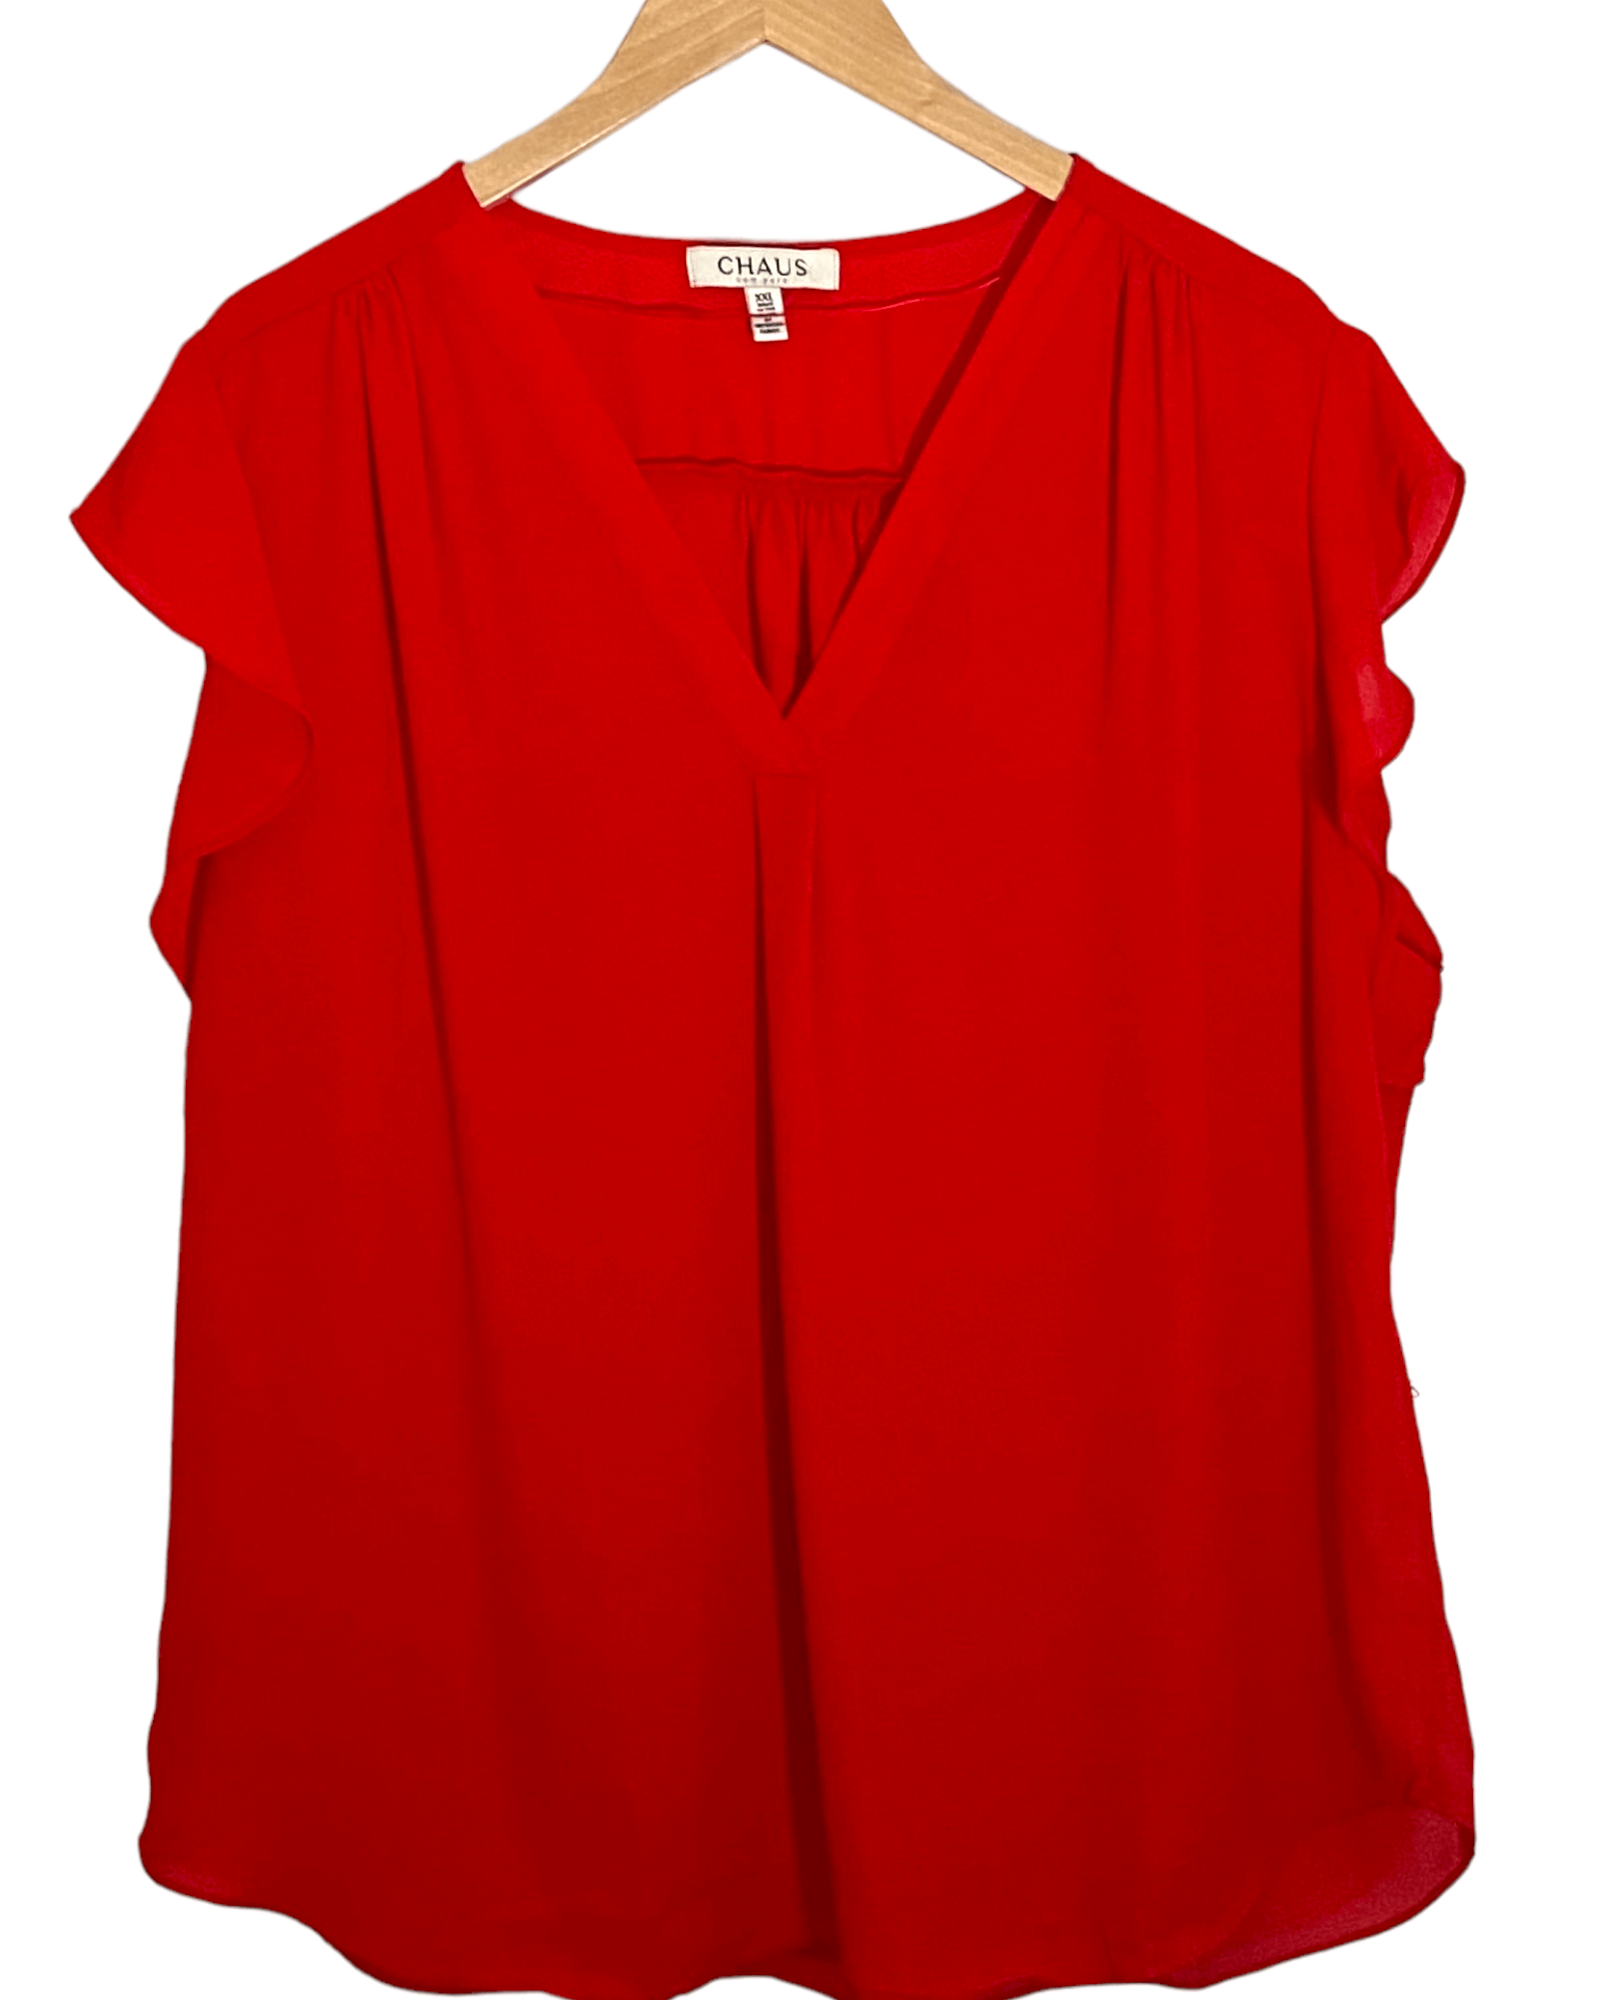 Bright Spring CHAUS poppy red flutter sleeve blouse